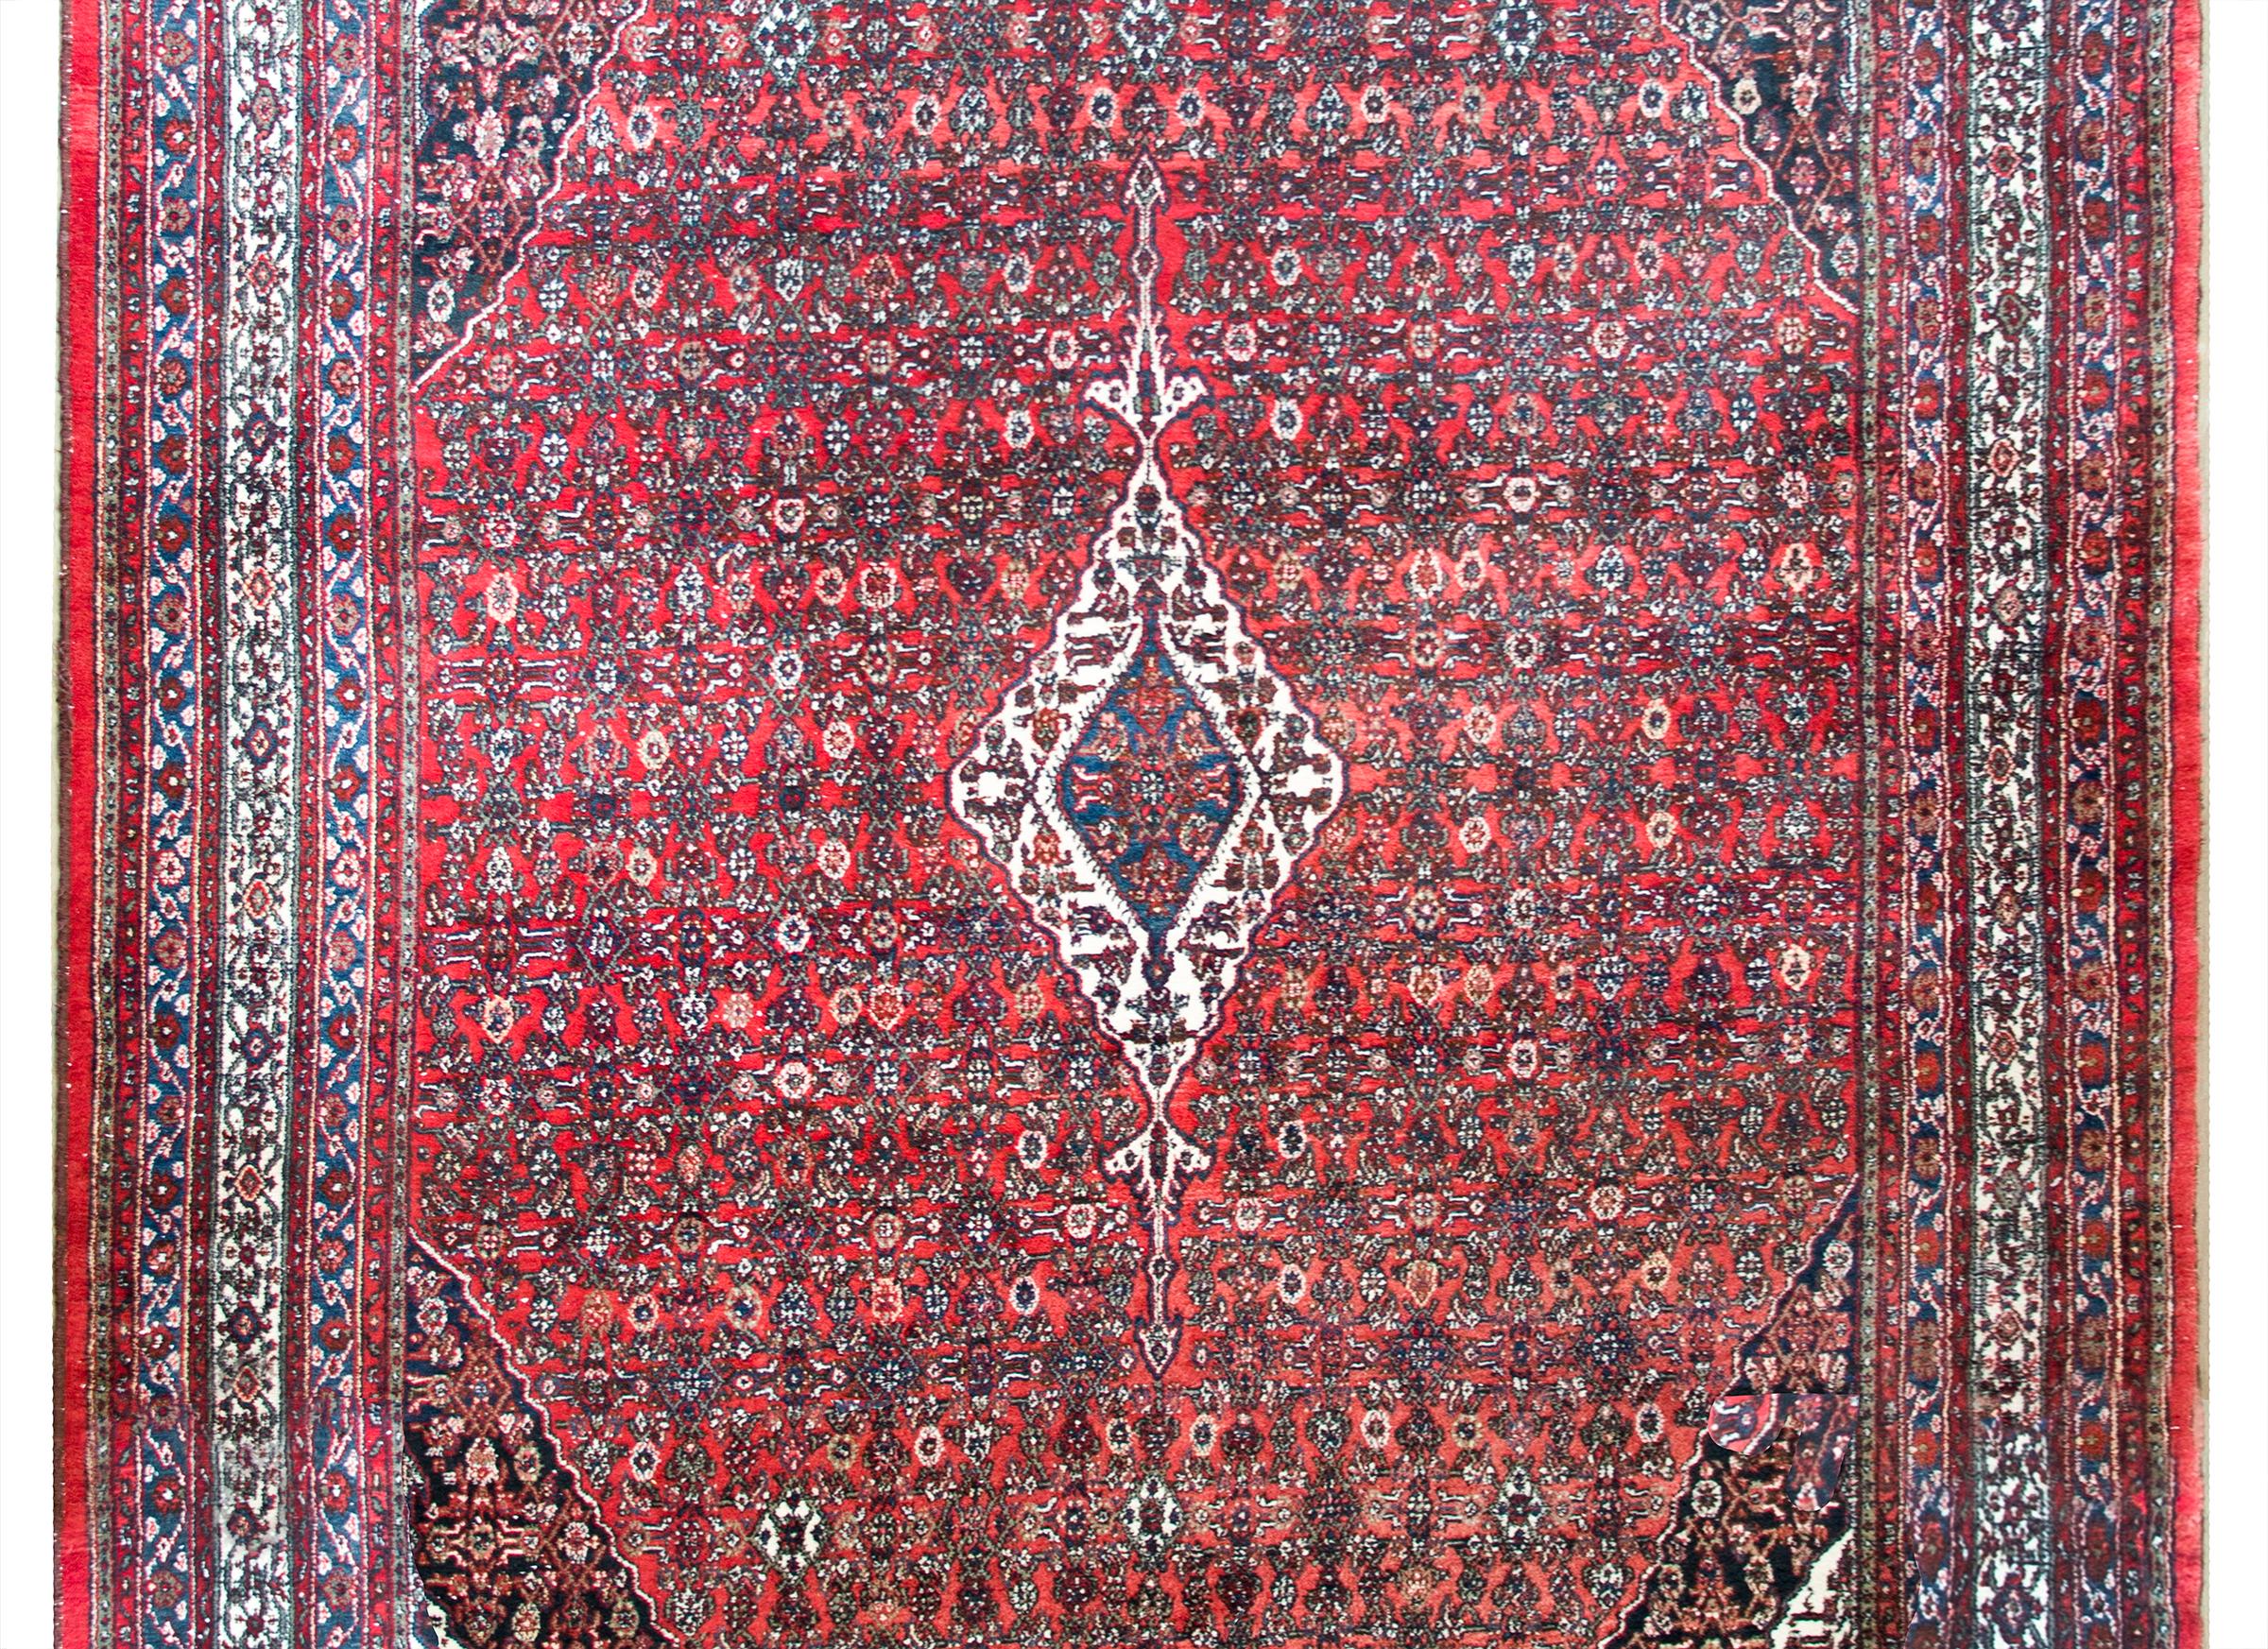 A beautiful early 20th century Persian Bibikibad rug with an all-over trellis floral pattern with a small central white diamond medallion, and a wide border composed of multiple thin petite floral patterned stripes.